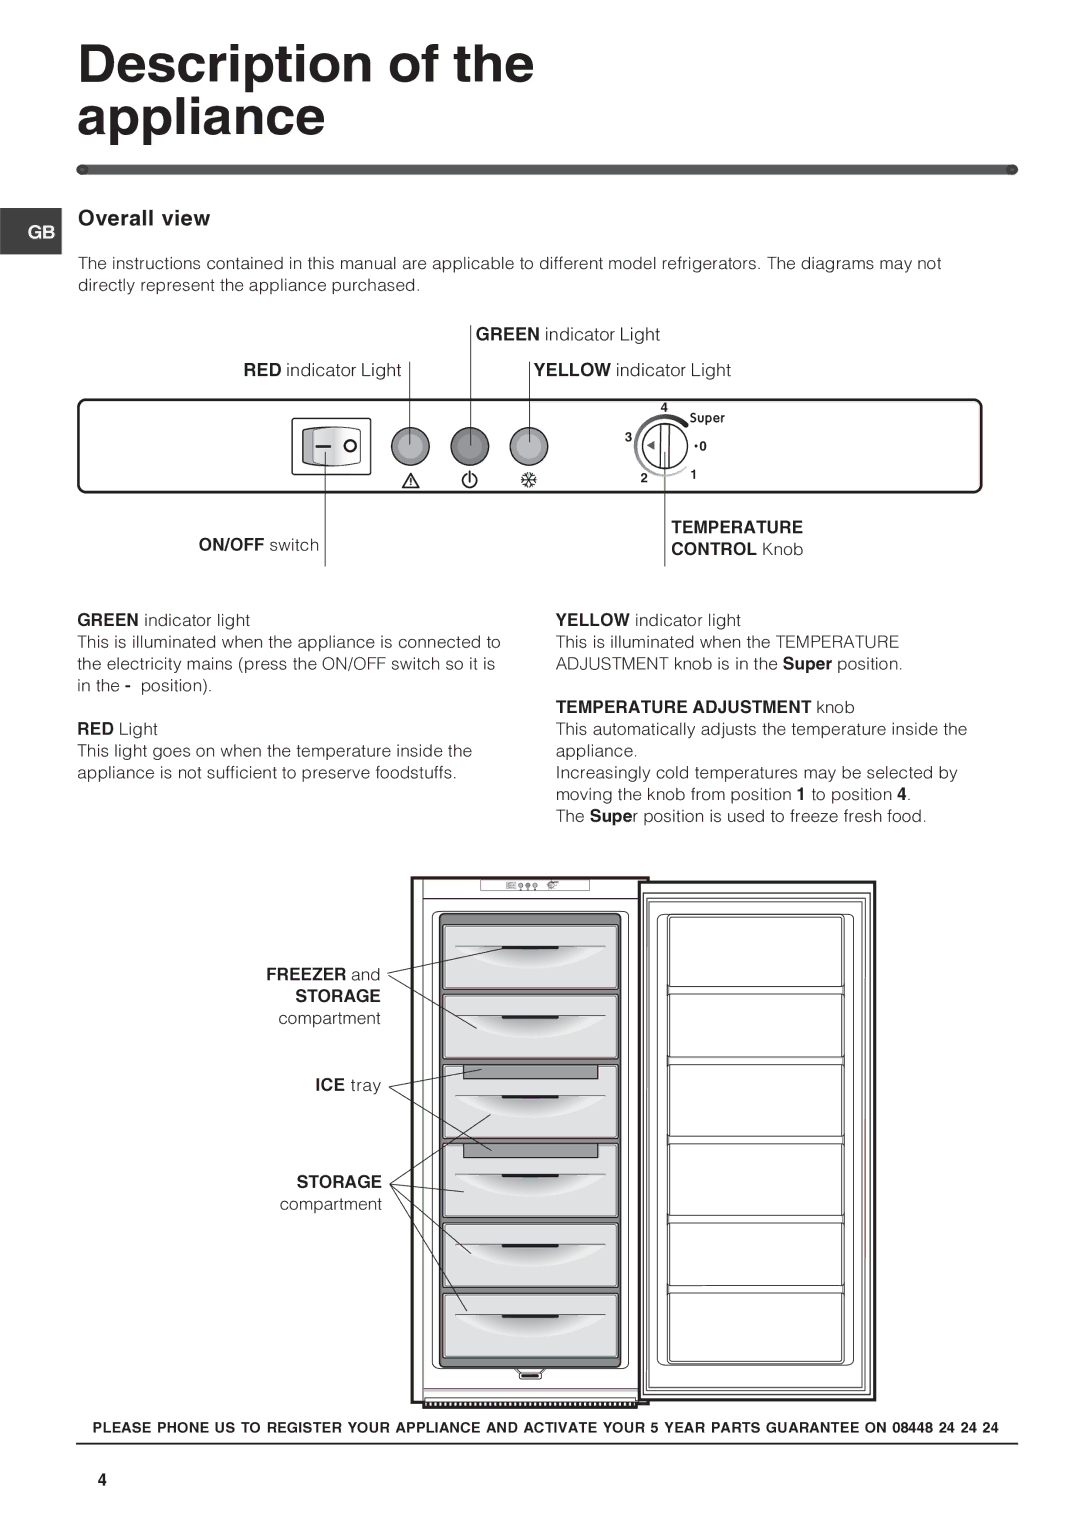 Hotpoint HZ2022 operating instructions Description of the appliance, Overall view 